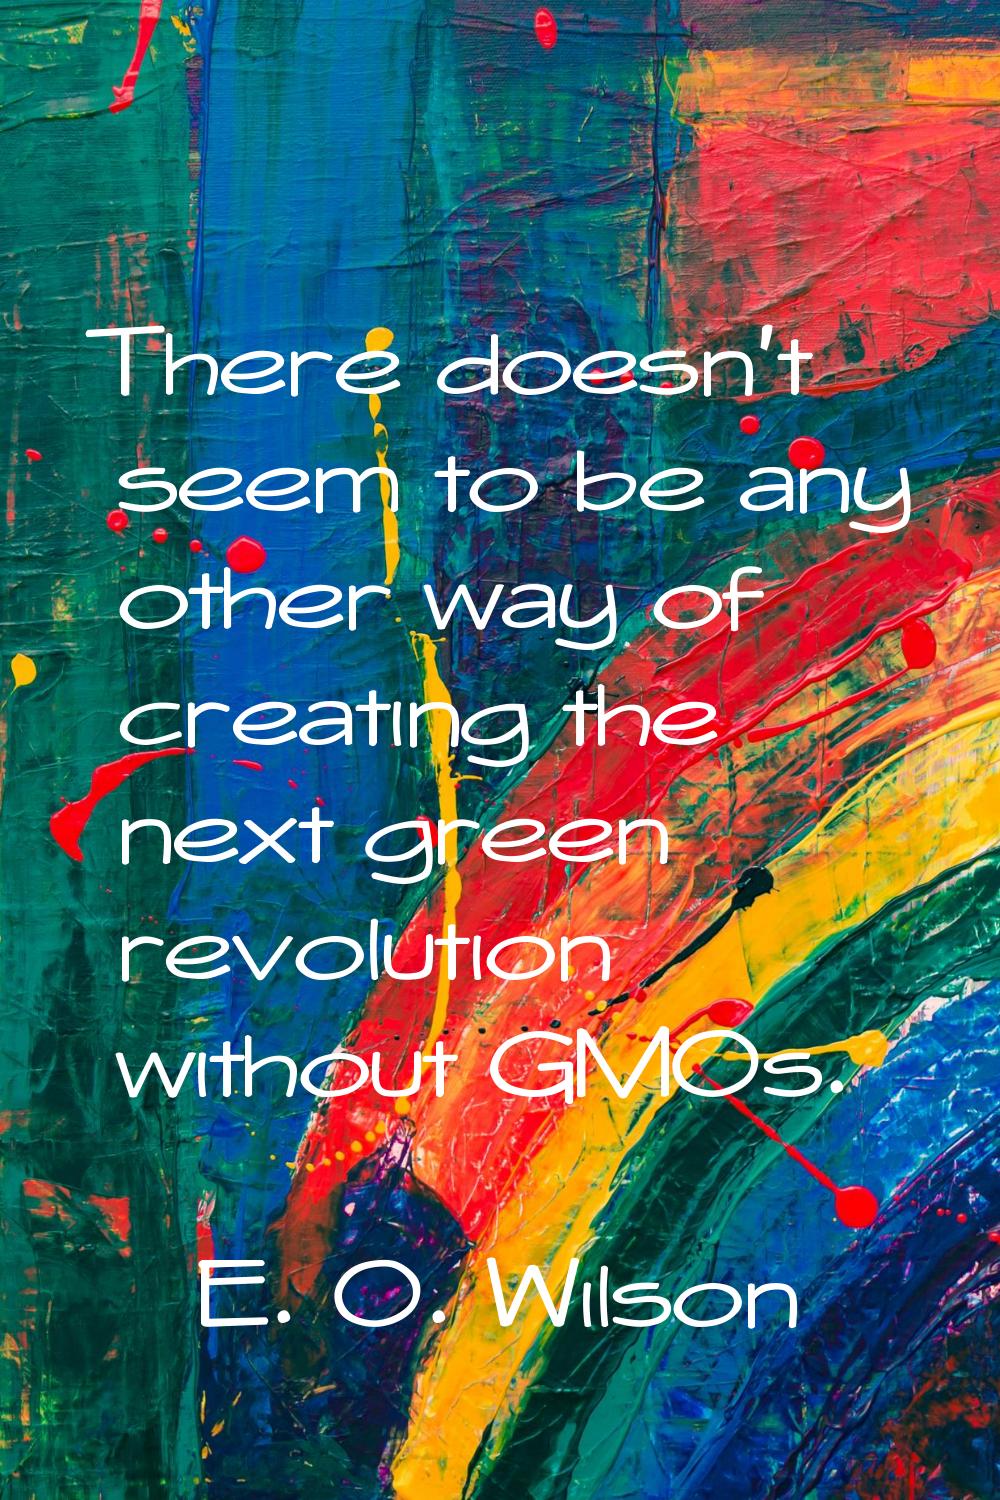 There doesn't seem to be any other way of creating the next green revolution without GMOs.